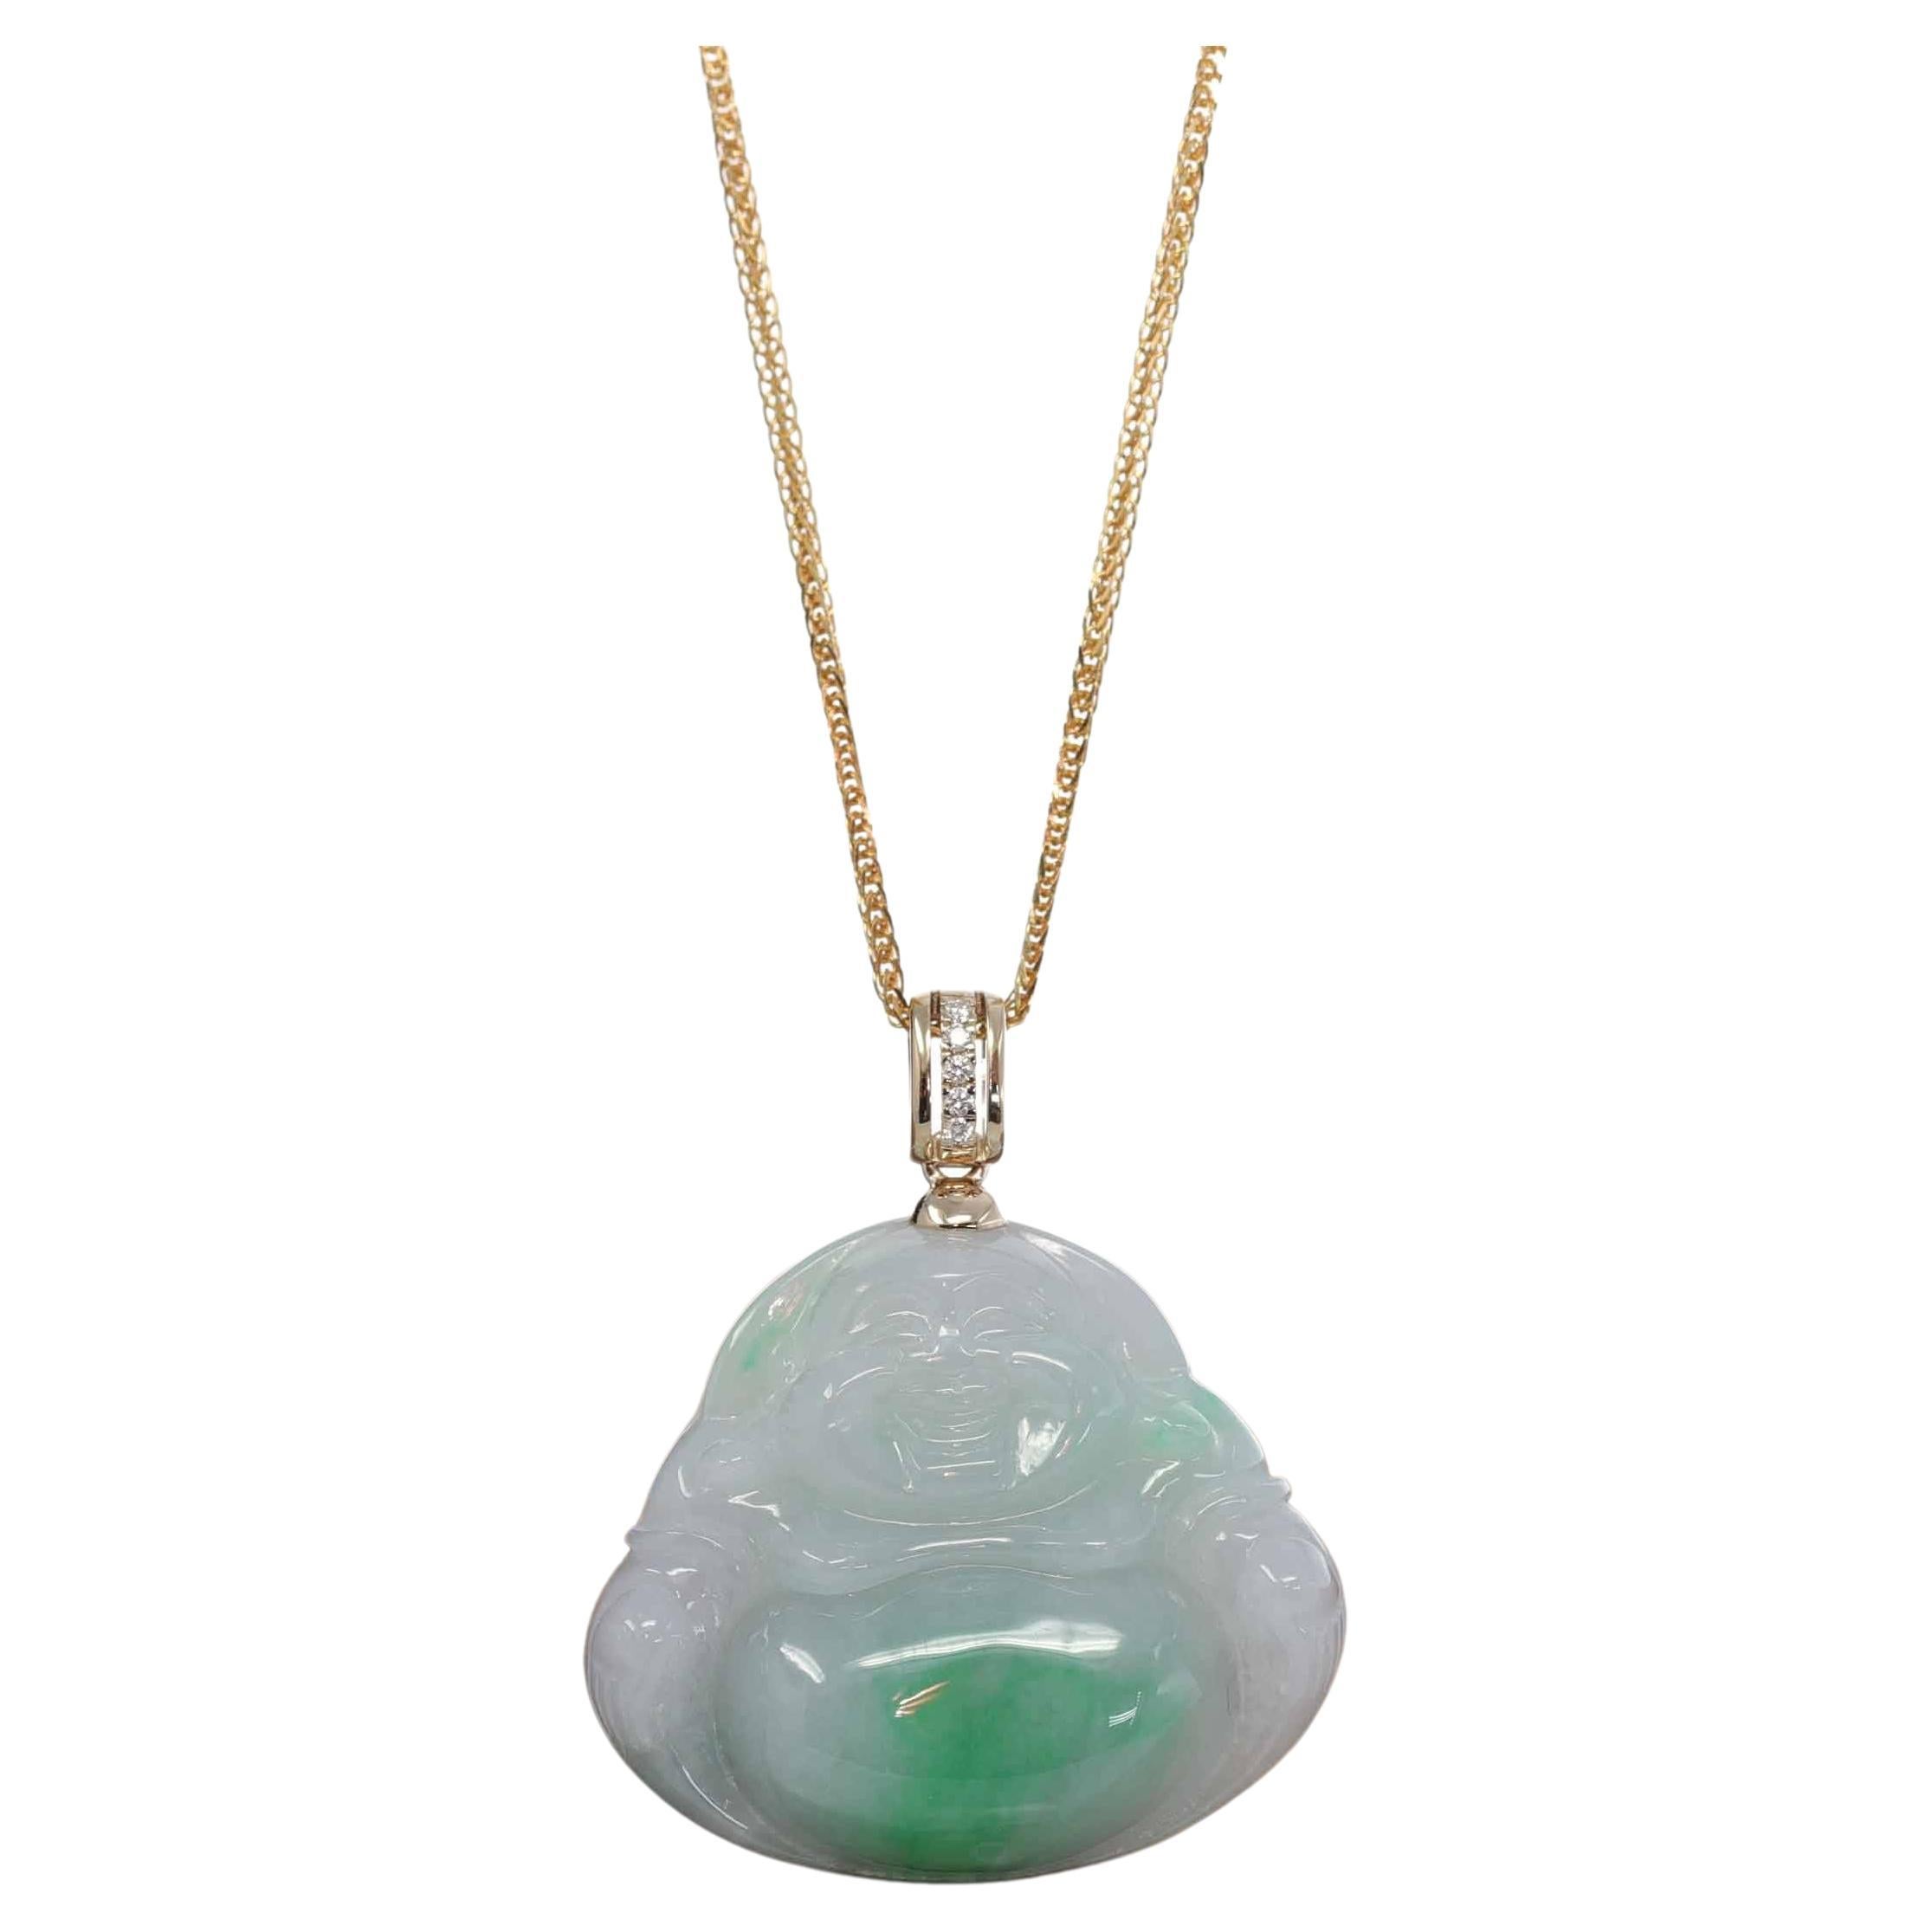 "Laughing Buddha" Green Jadeite Jade Necklace With 14k Yellow Gold Diamond Bail For Sale